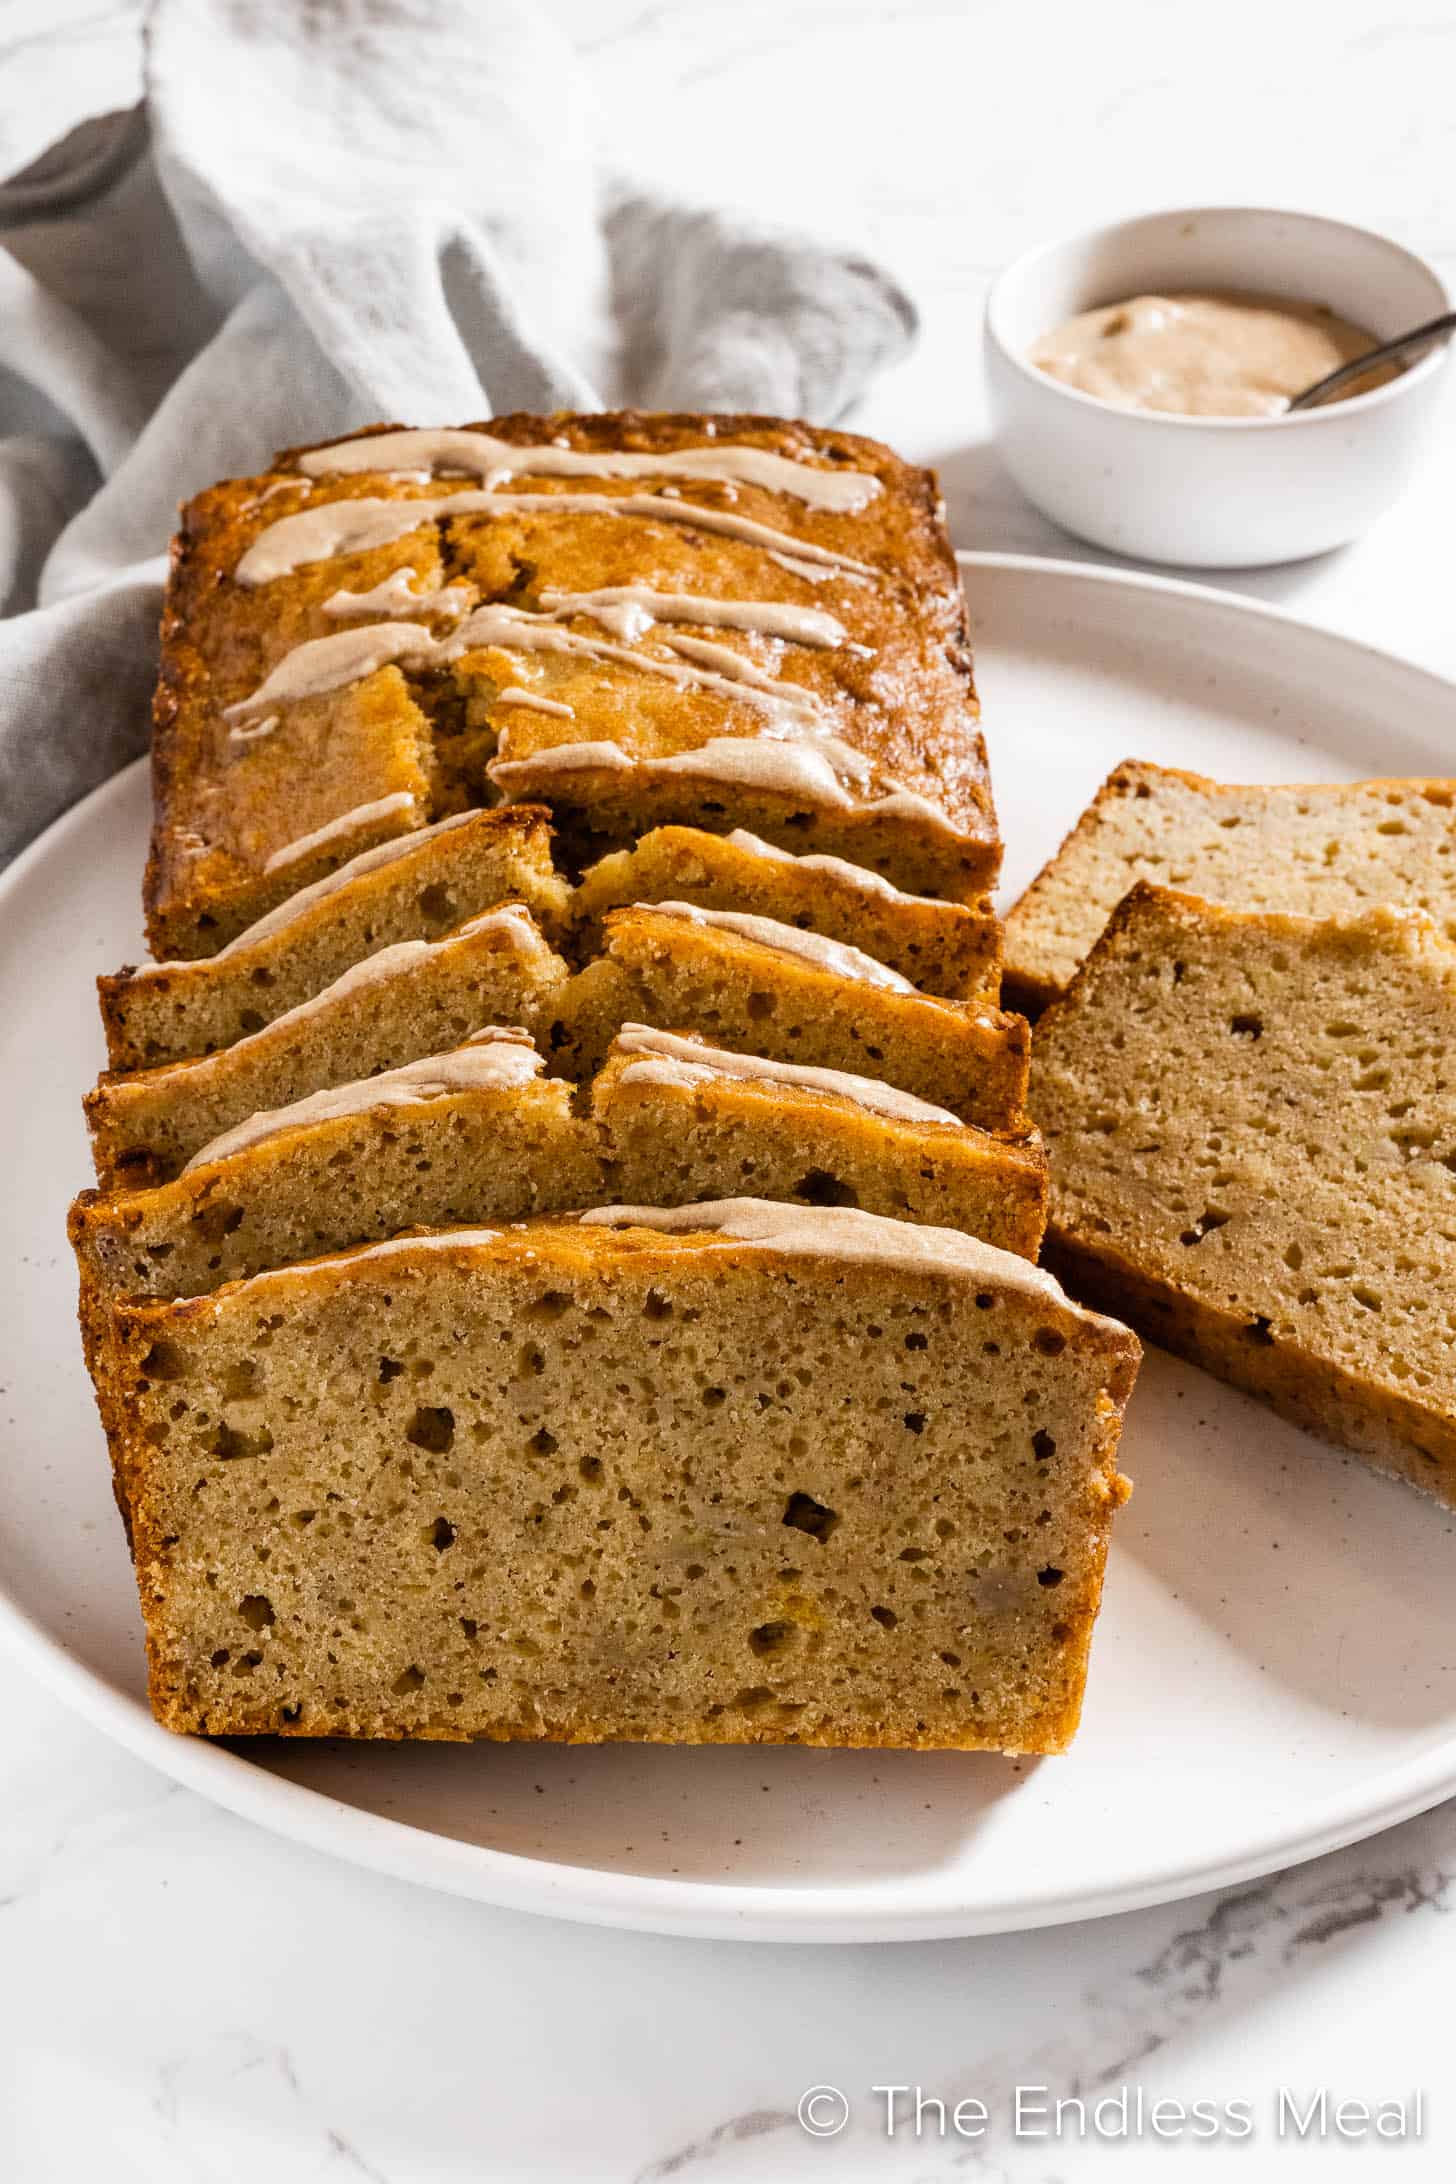 Slices of Brown Butter Banana Bread on a plate.